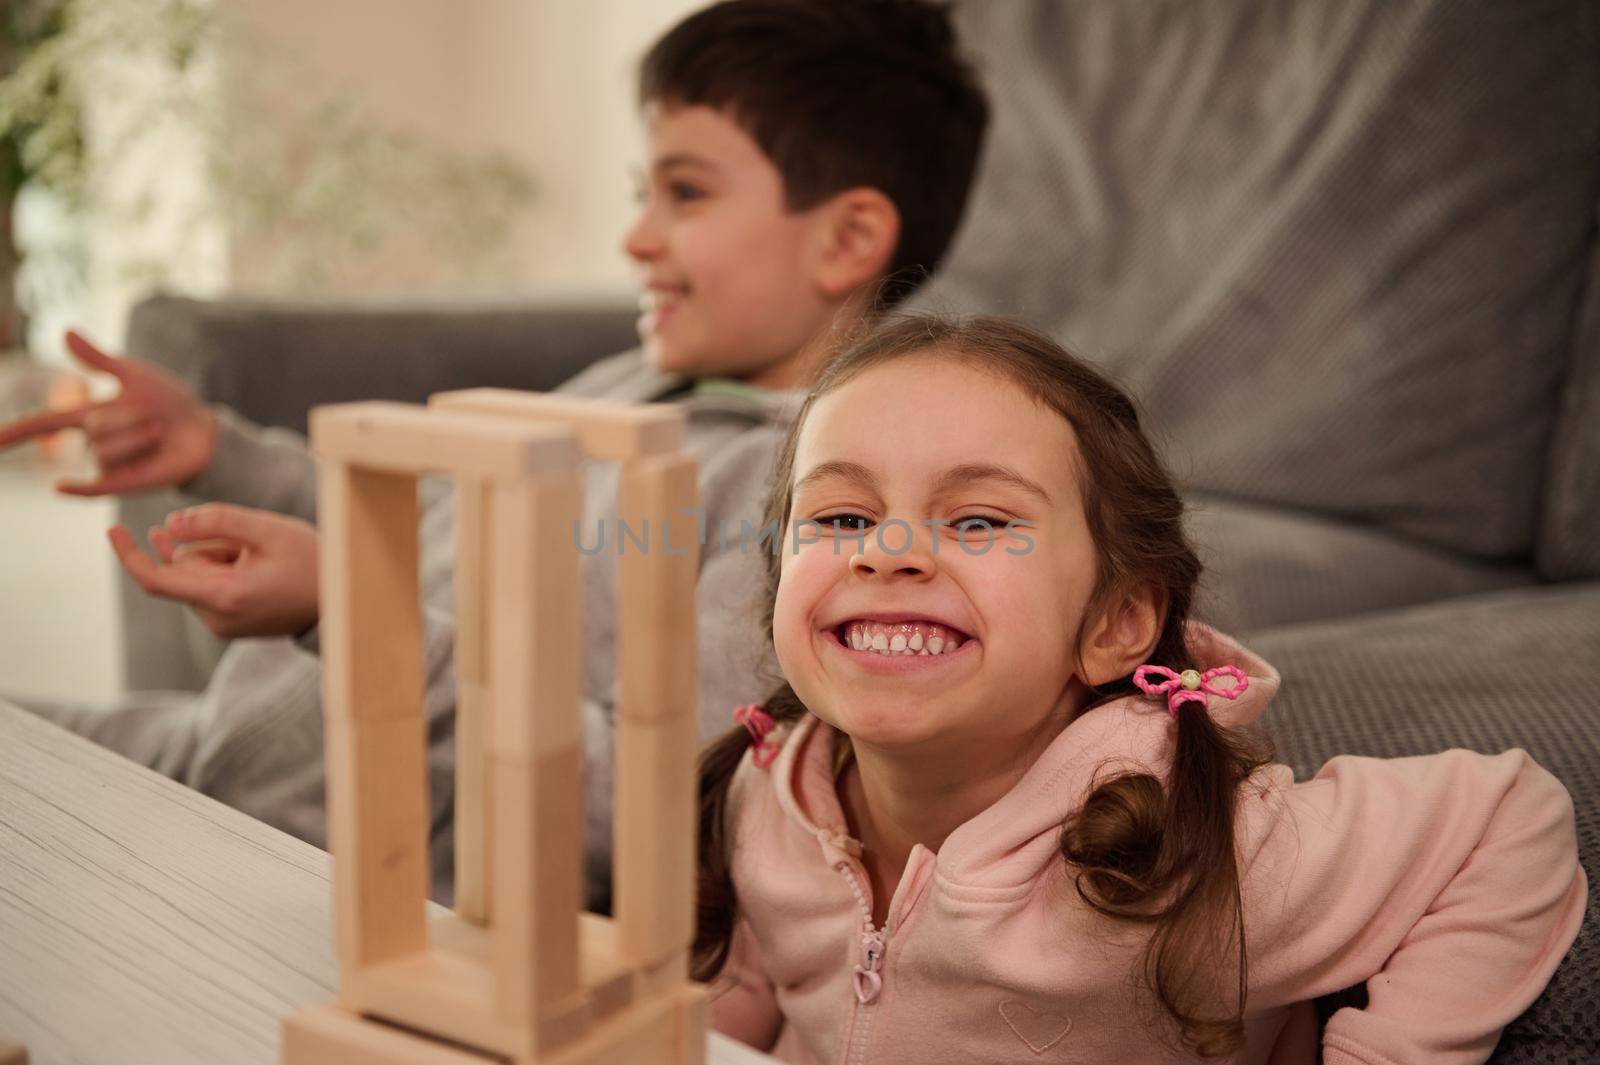 Beautiful child, adorable little girl in pink sweatshirt plays board game with her brother, builds wooden structures from wooden bricks and blocks, smiles toothy smile, looking at camera by artgf